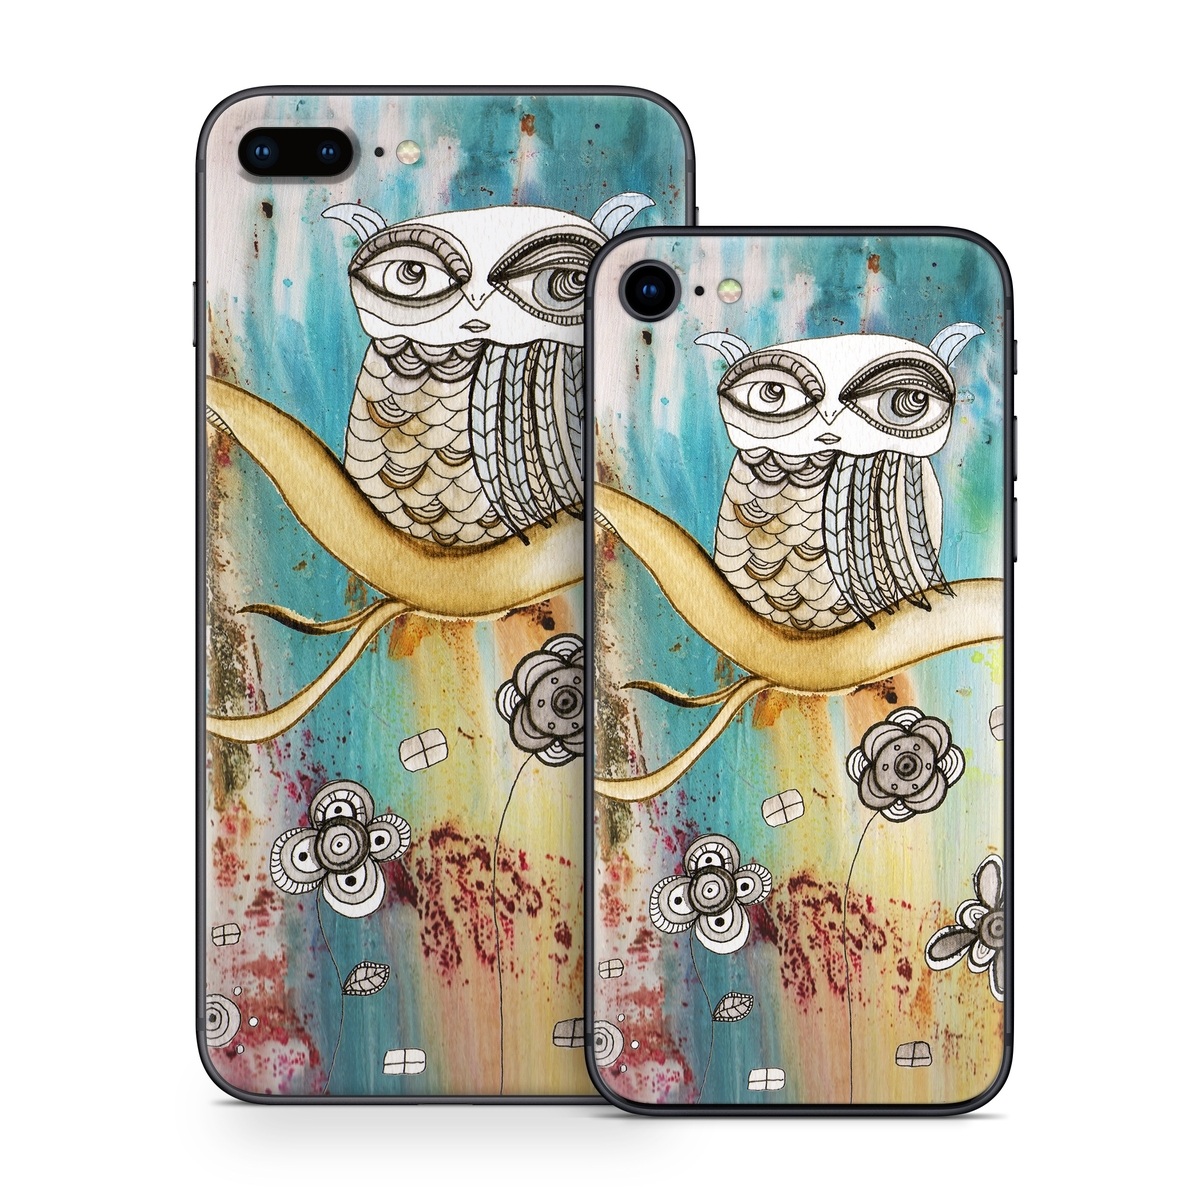 iPhone 8 Series Skin design of Owl, Pink, Illustration, Art, Visual arts, Watercolor paint, Organism, Modern art, Graphic design, Pattern, with gray, red, green, black, blue, purple colors